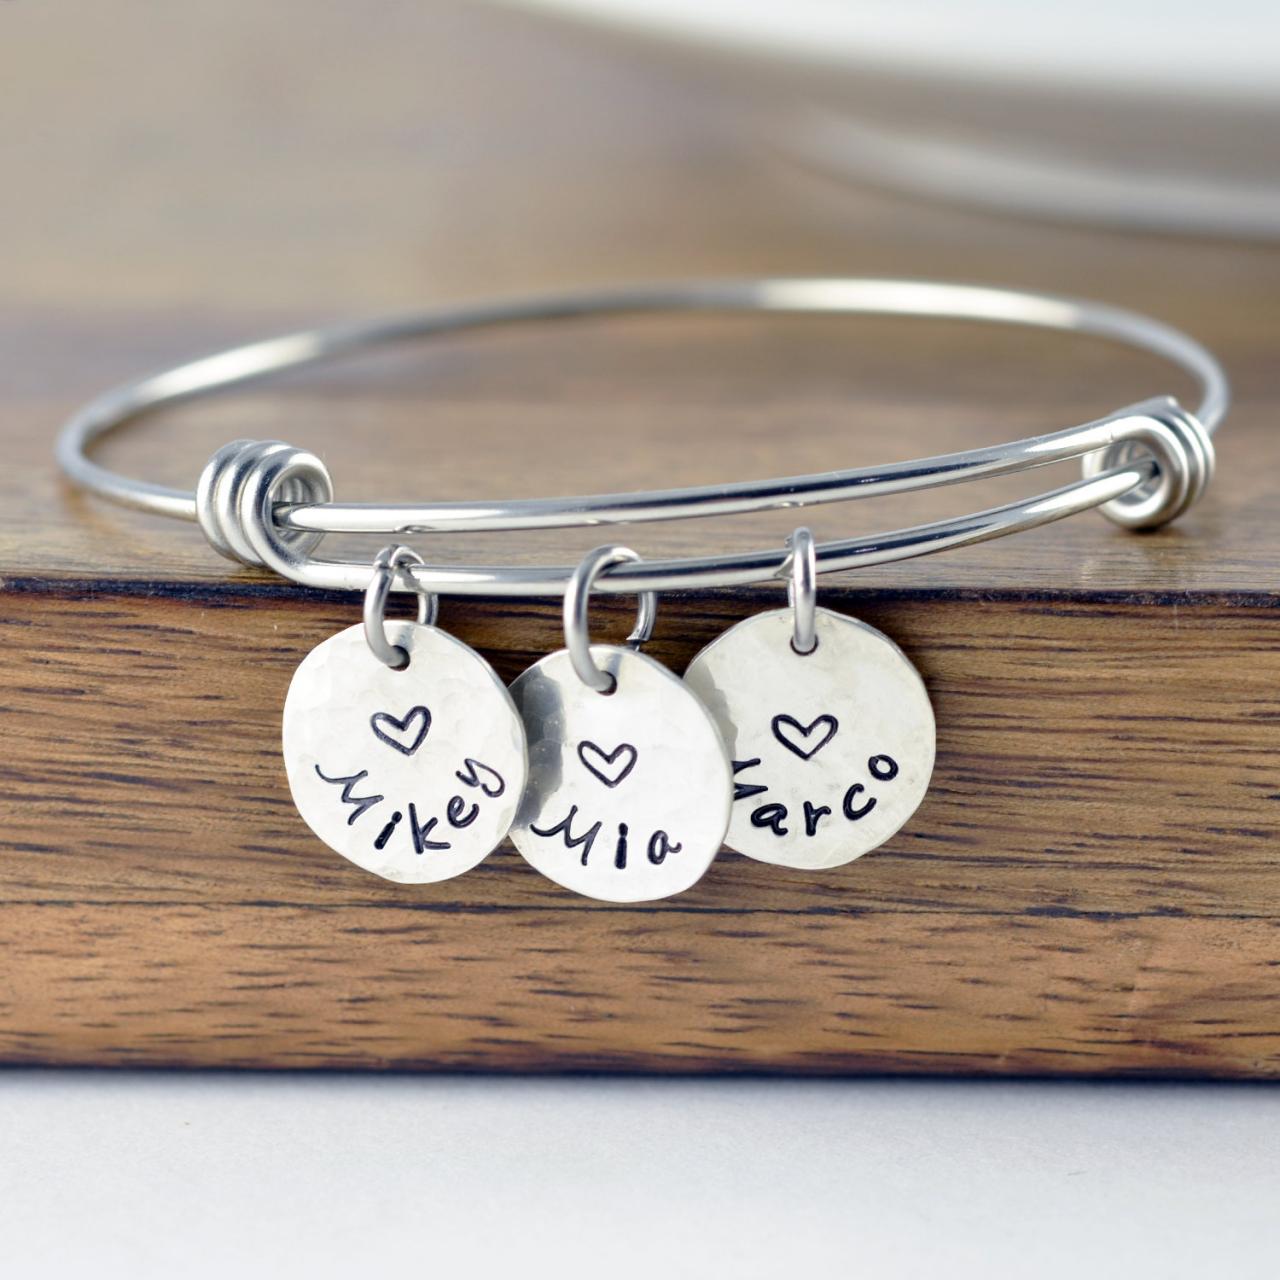 Gift For Wife, Gift For Women Birthday, Personalized Gift, Silver Bracelet, Mother's Bracelet, Mom Jewelry, Kids Name Jewelry, Gifts For